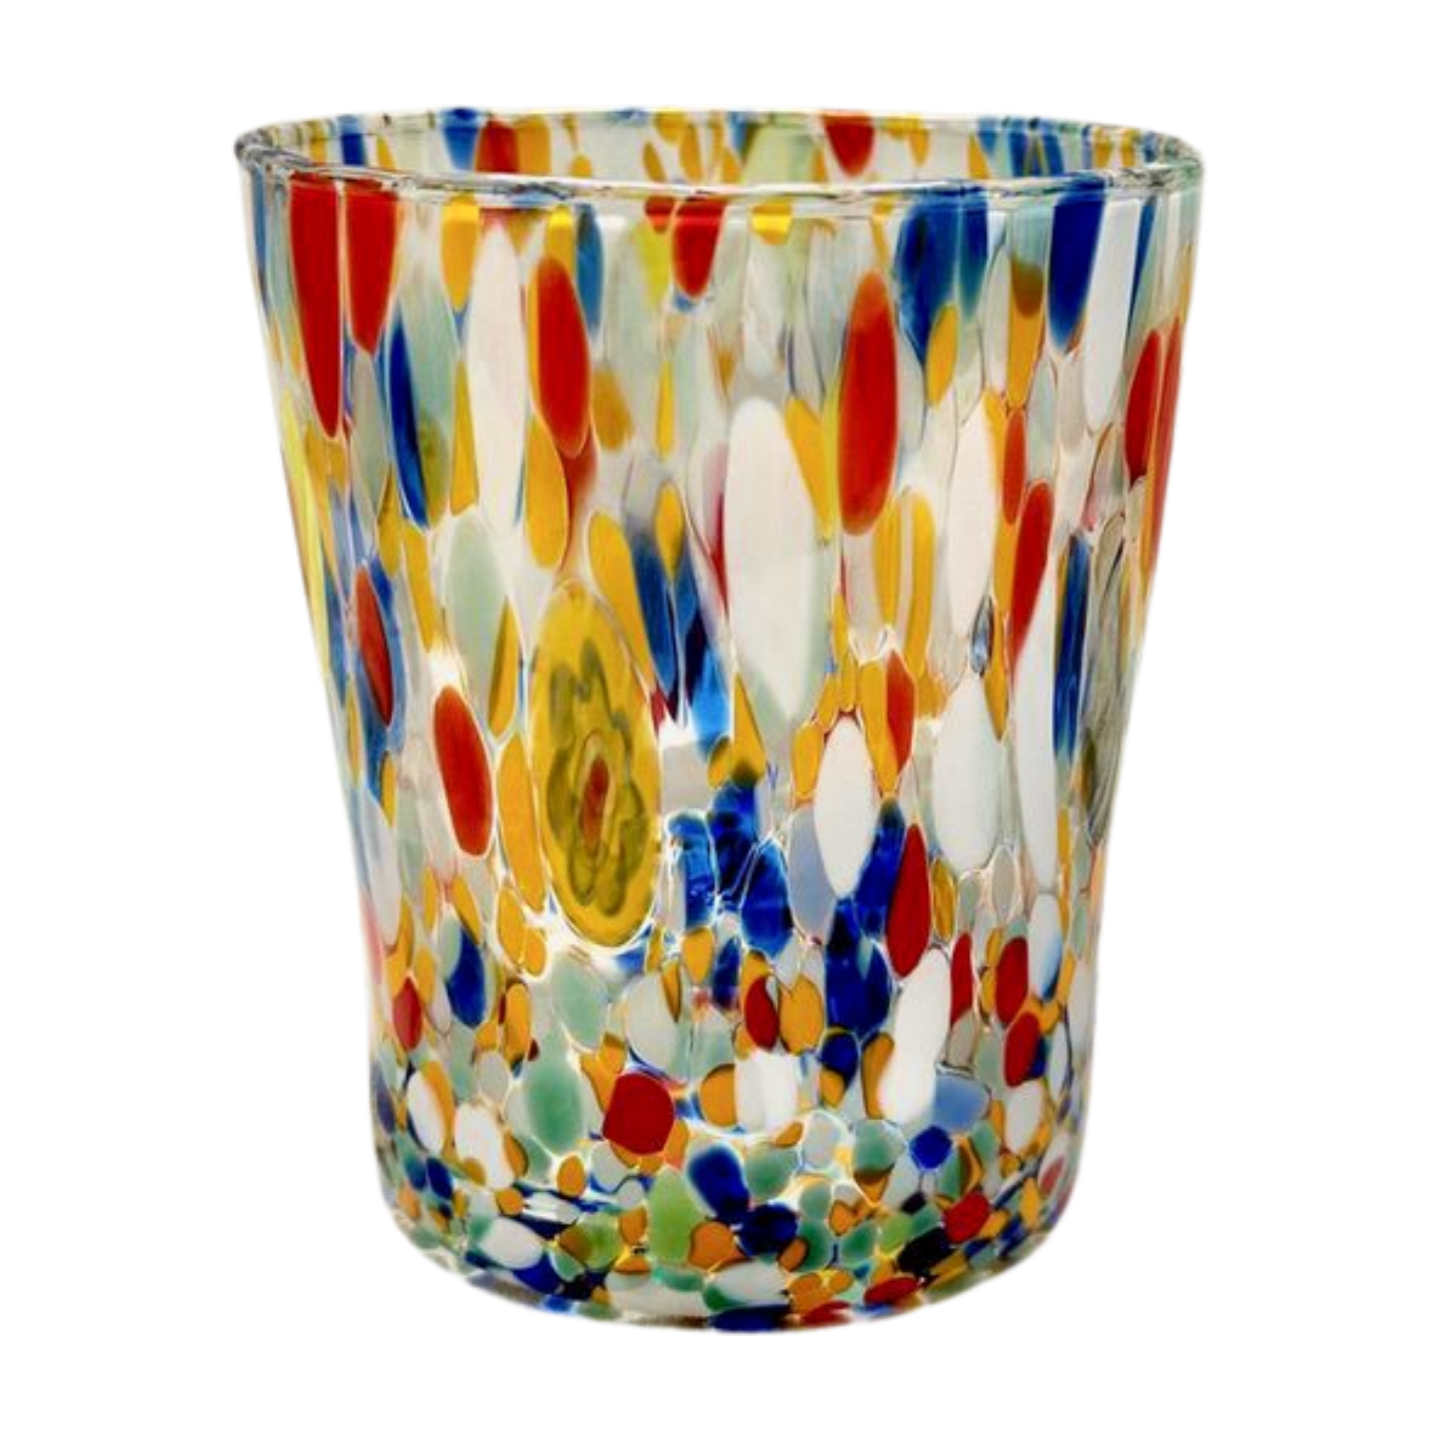 Murano glass tumbler featuring a multicolor design. Heavy and durable, this glass is perfect for serving any beverage.